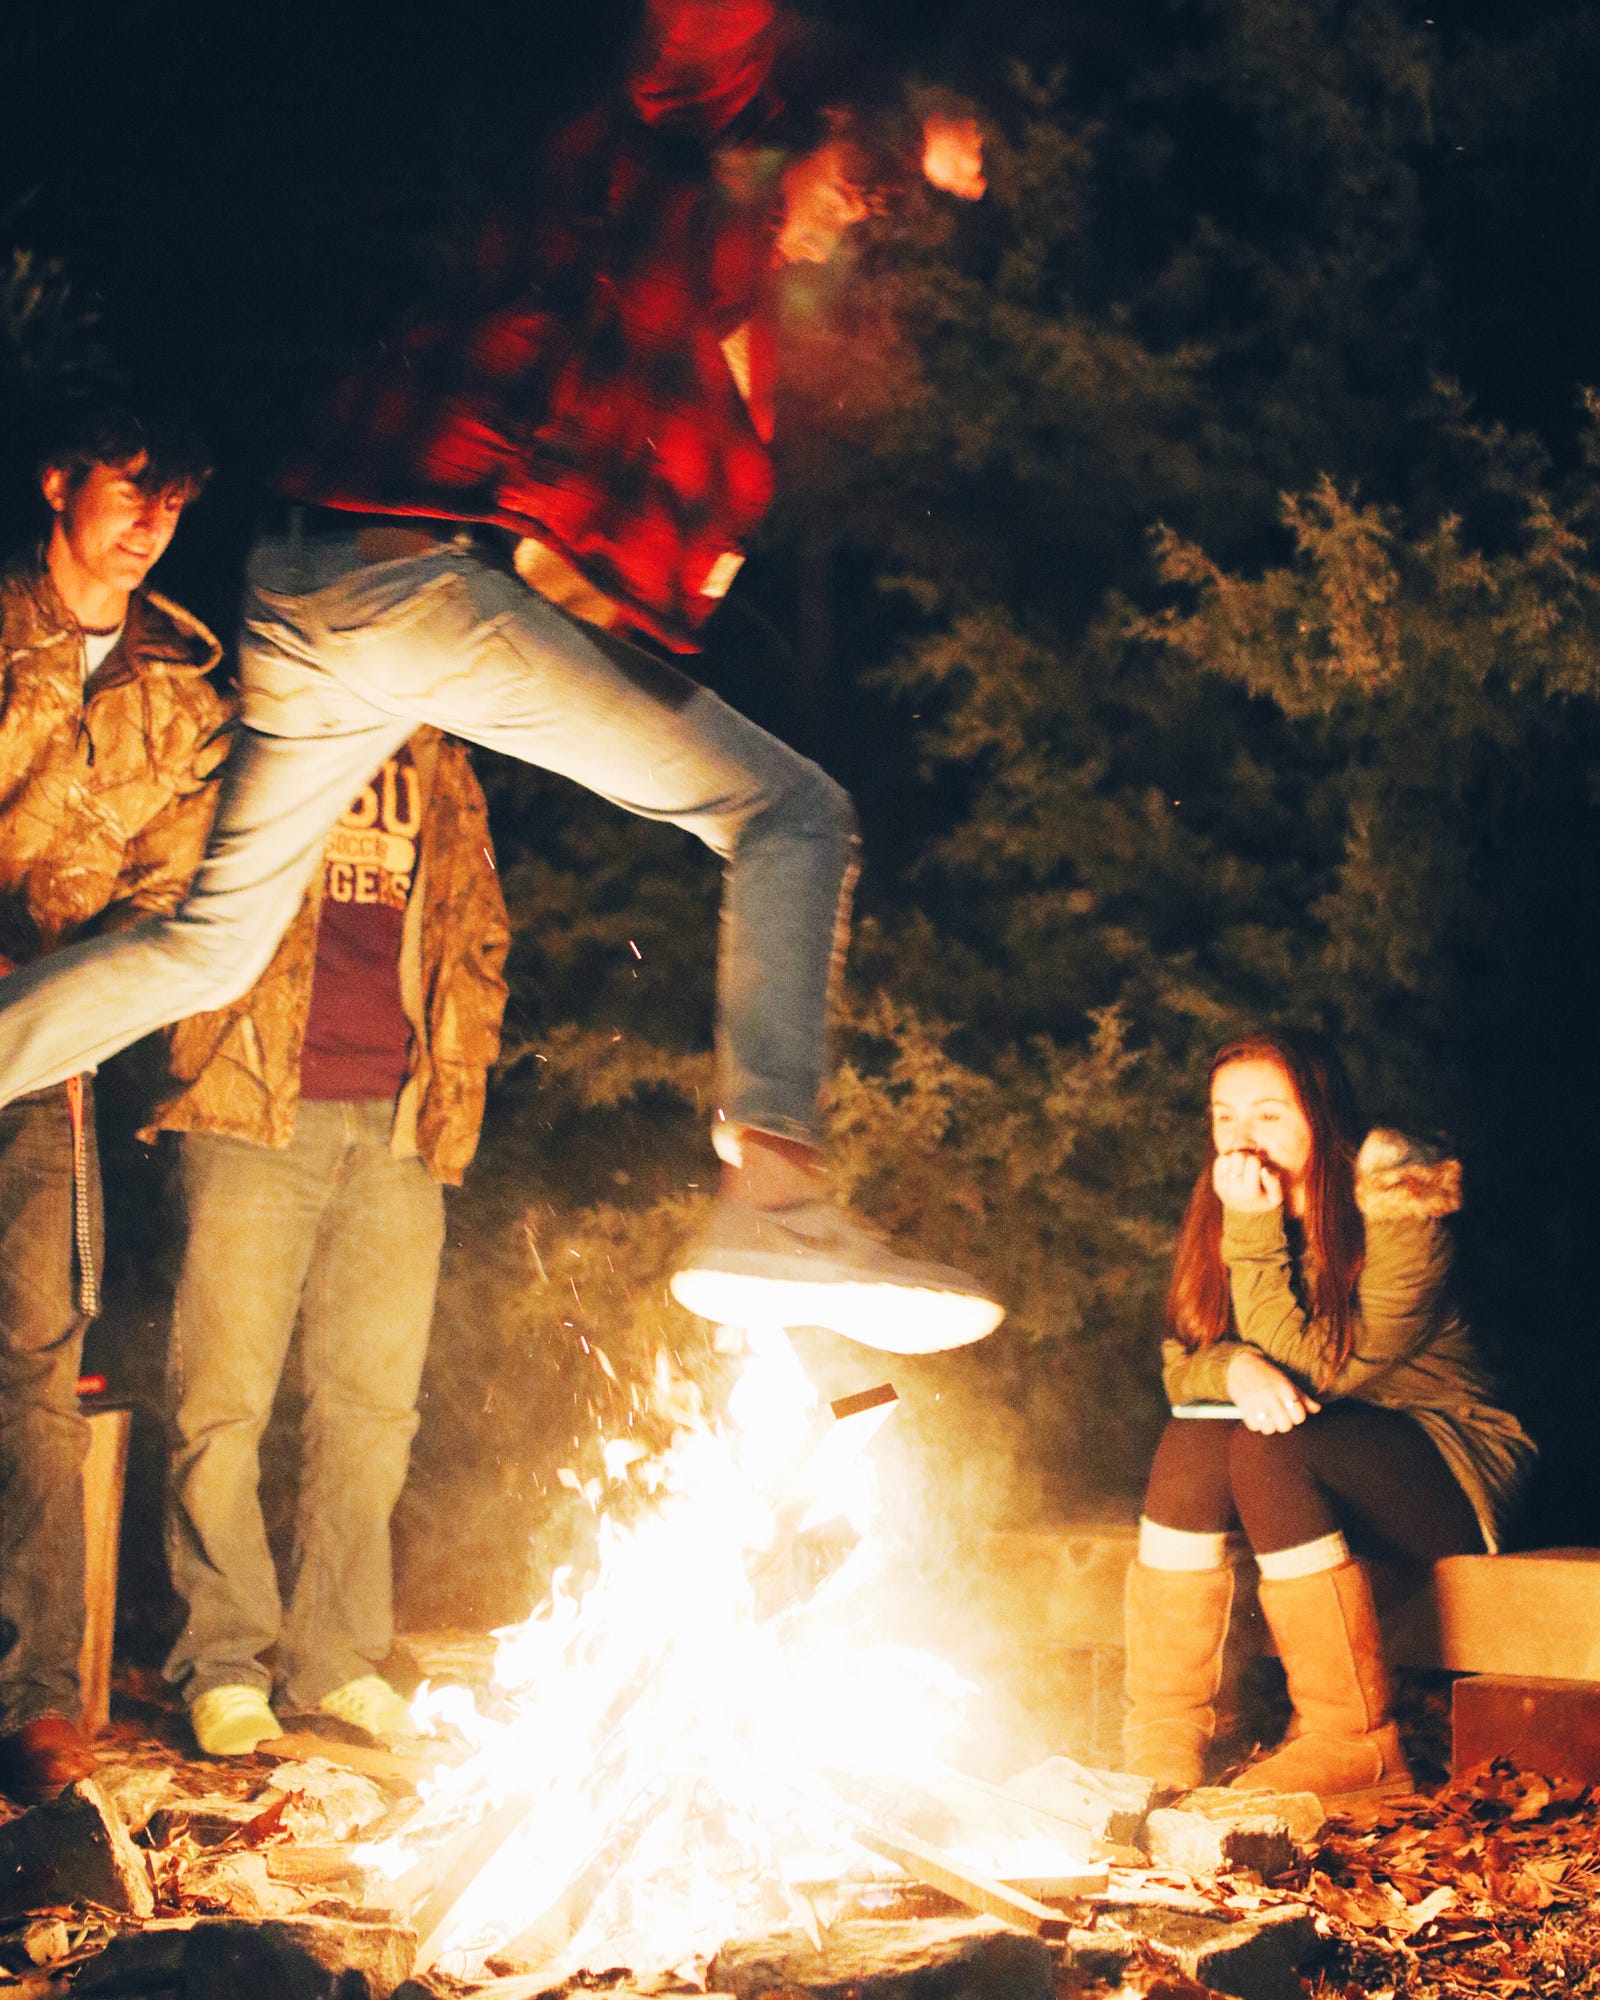 Guy jumping over a fire with people watching.